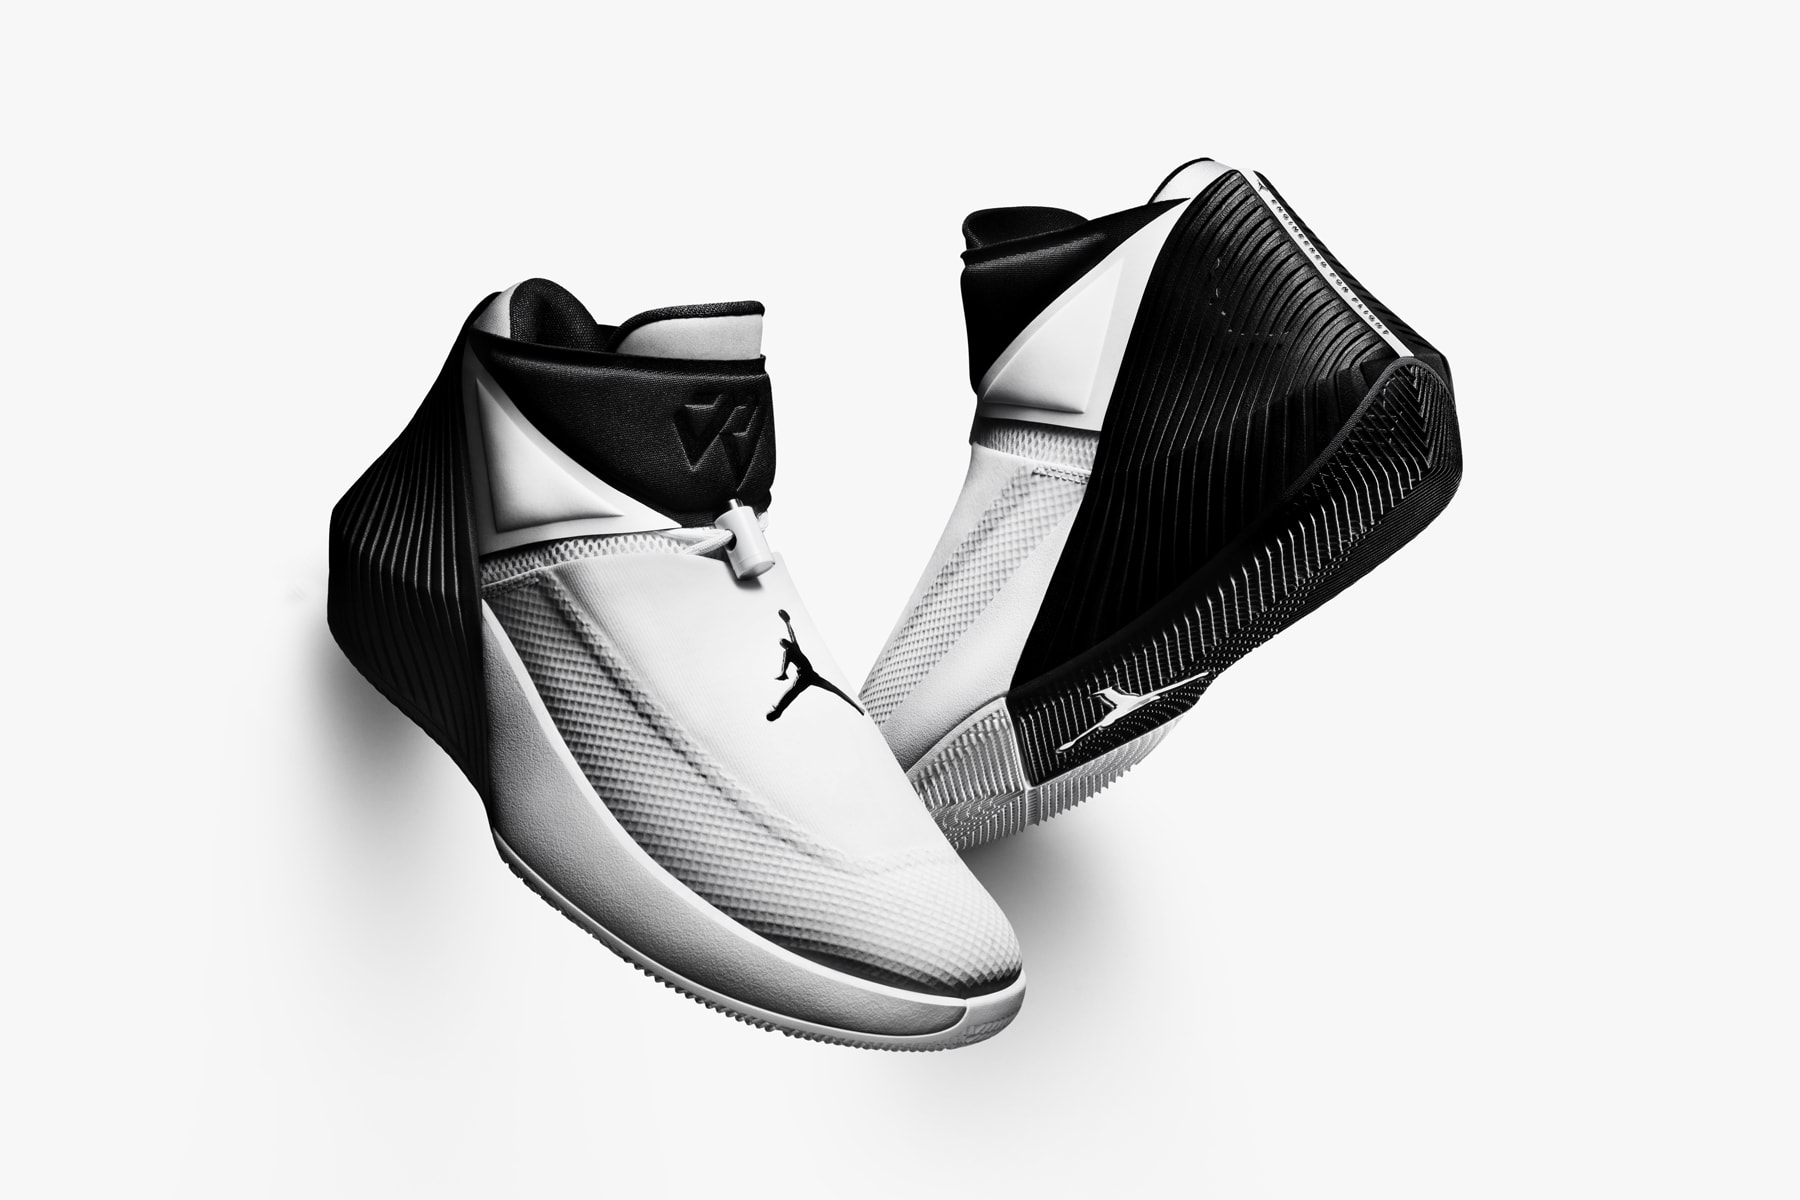 Jordan Brand Russell Westbrook Why Not Zer0.1 2-Way Mirror Image January 15 February 15 Release